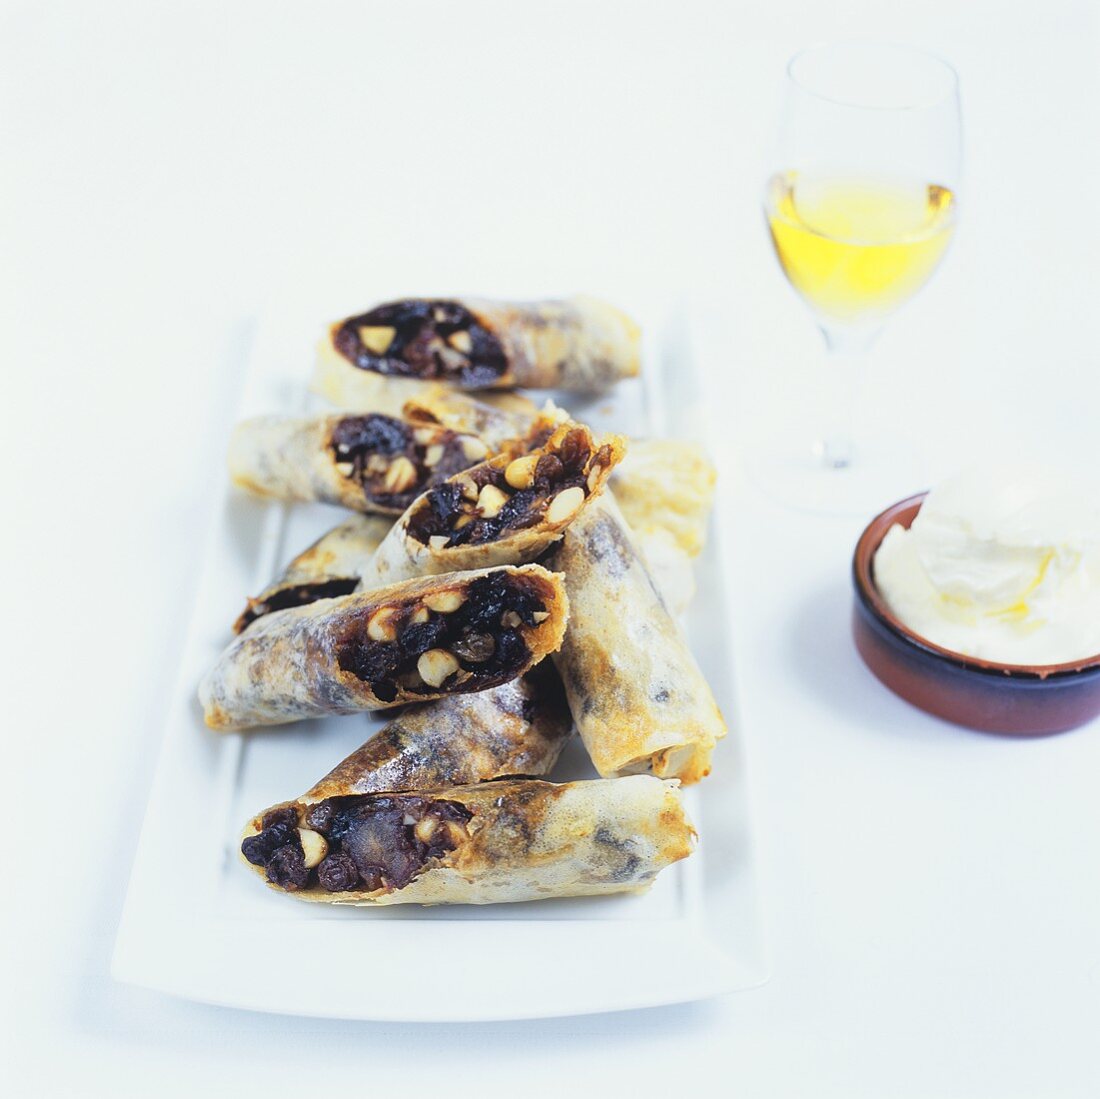 Deep-fried pastry rolls filled with dried fruit and nuts